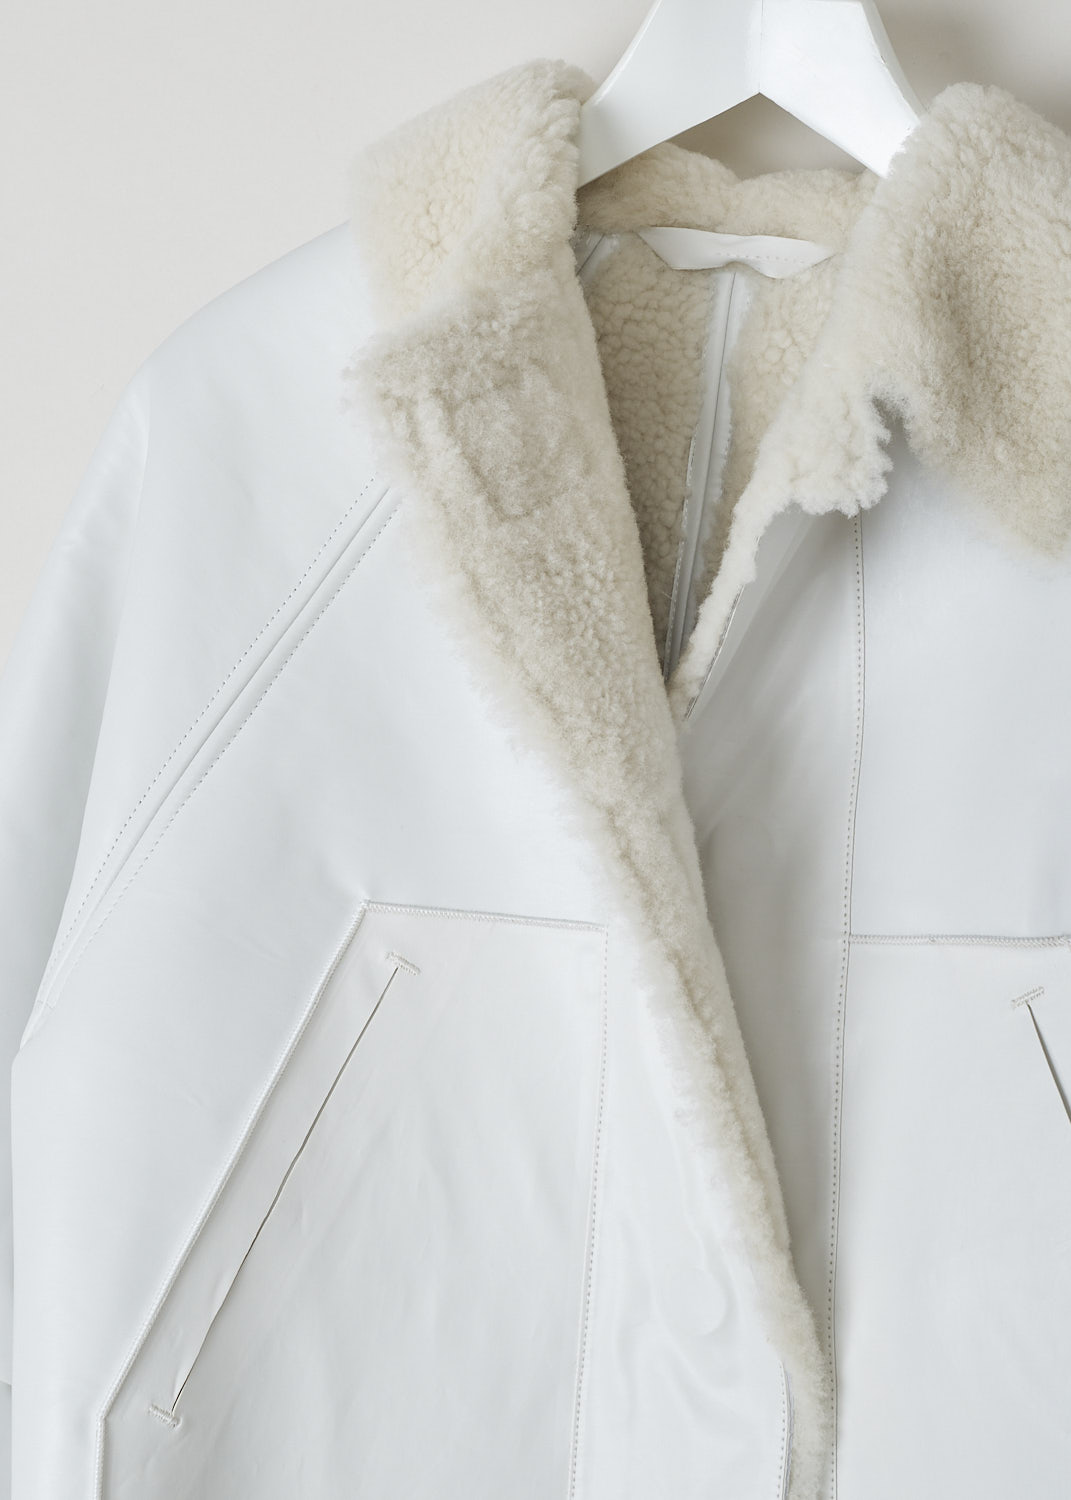 KASSL, CROPPED SHEARLING OIL WHITE COAT, C11310000W_COAT_ORIGINAL_CROPPED_SHEARLING_OIL_WHITE, White, Detail, This cropped coat is made with the brand's signature oil coated cotton-blend in white and is fully lined with shearling. The coat has a shearling spread collar, magnetic front button closure and slanted pockets. The coat is constructed with different seams, giving it a paneled look. 
